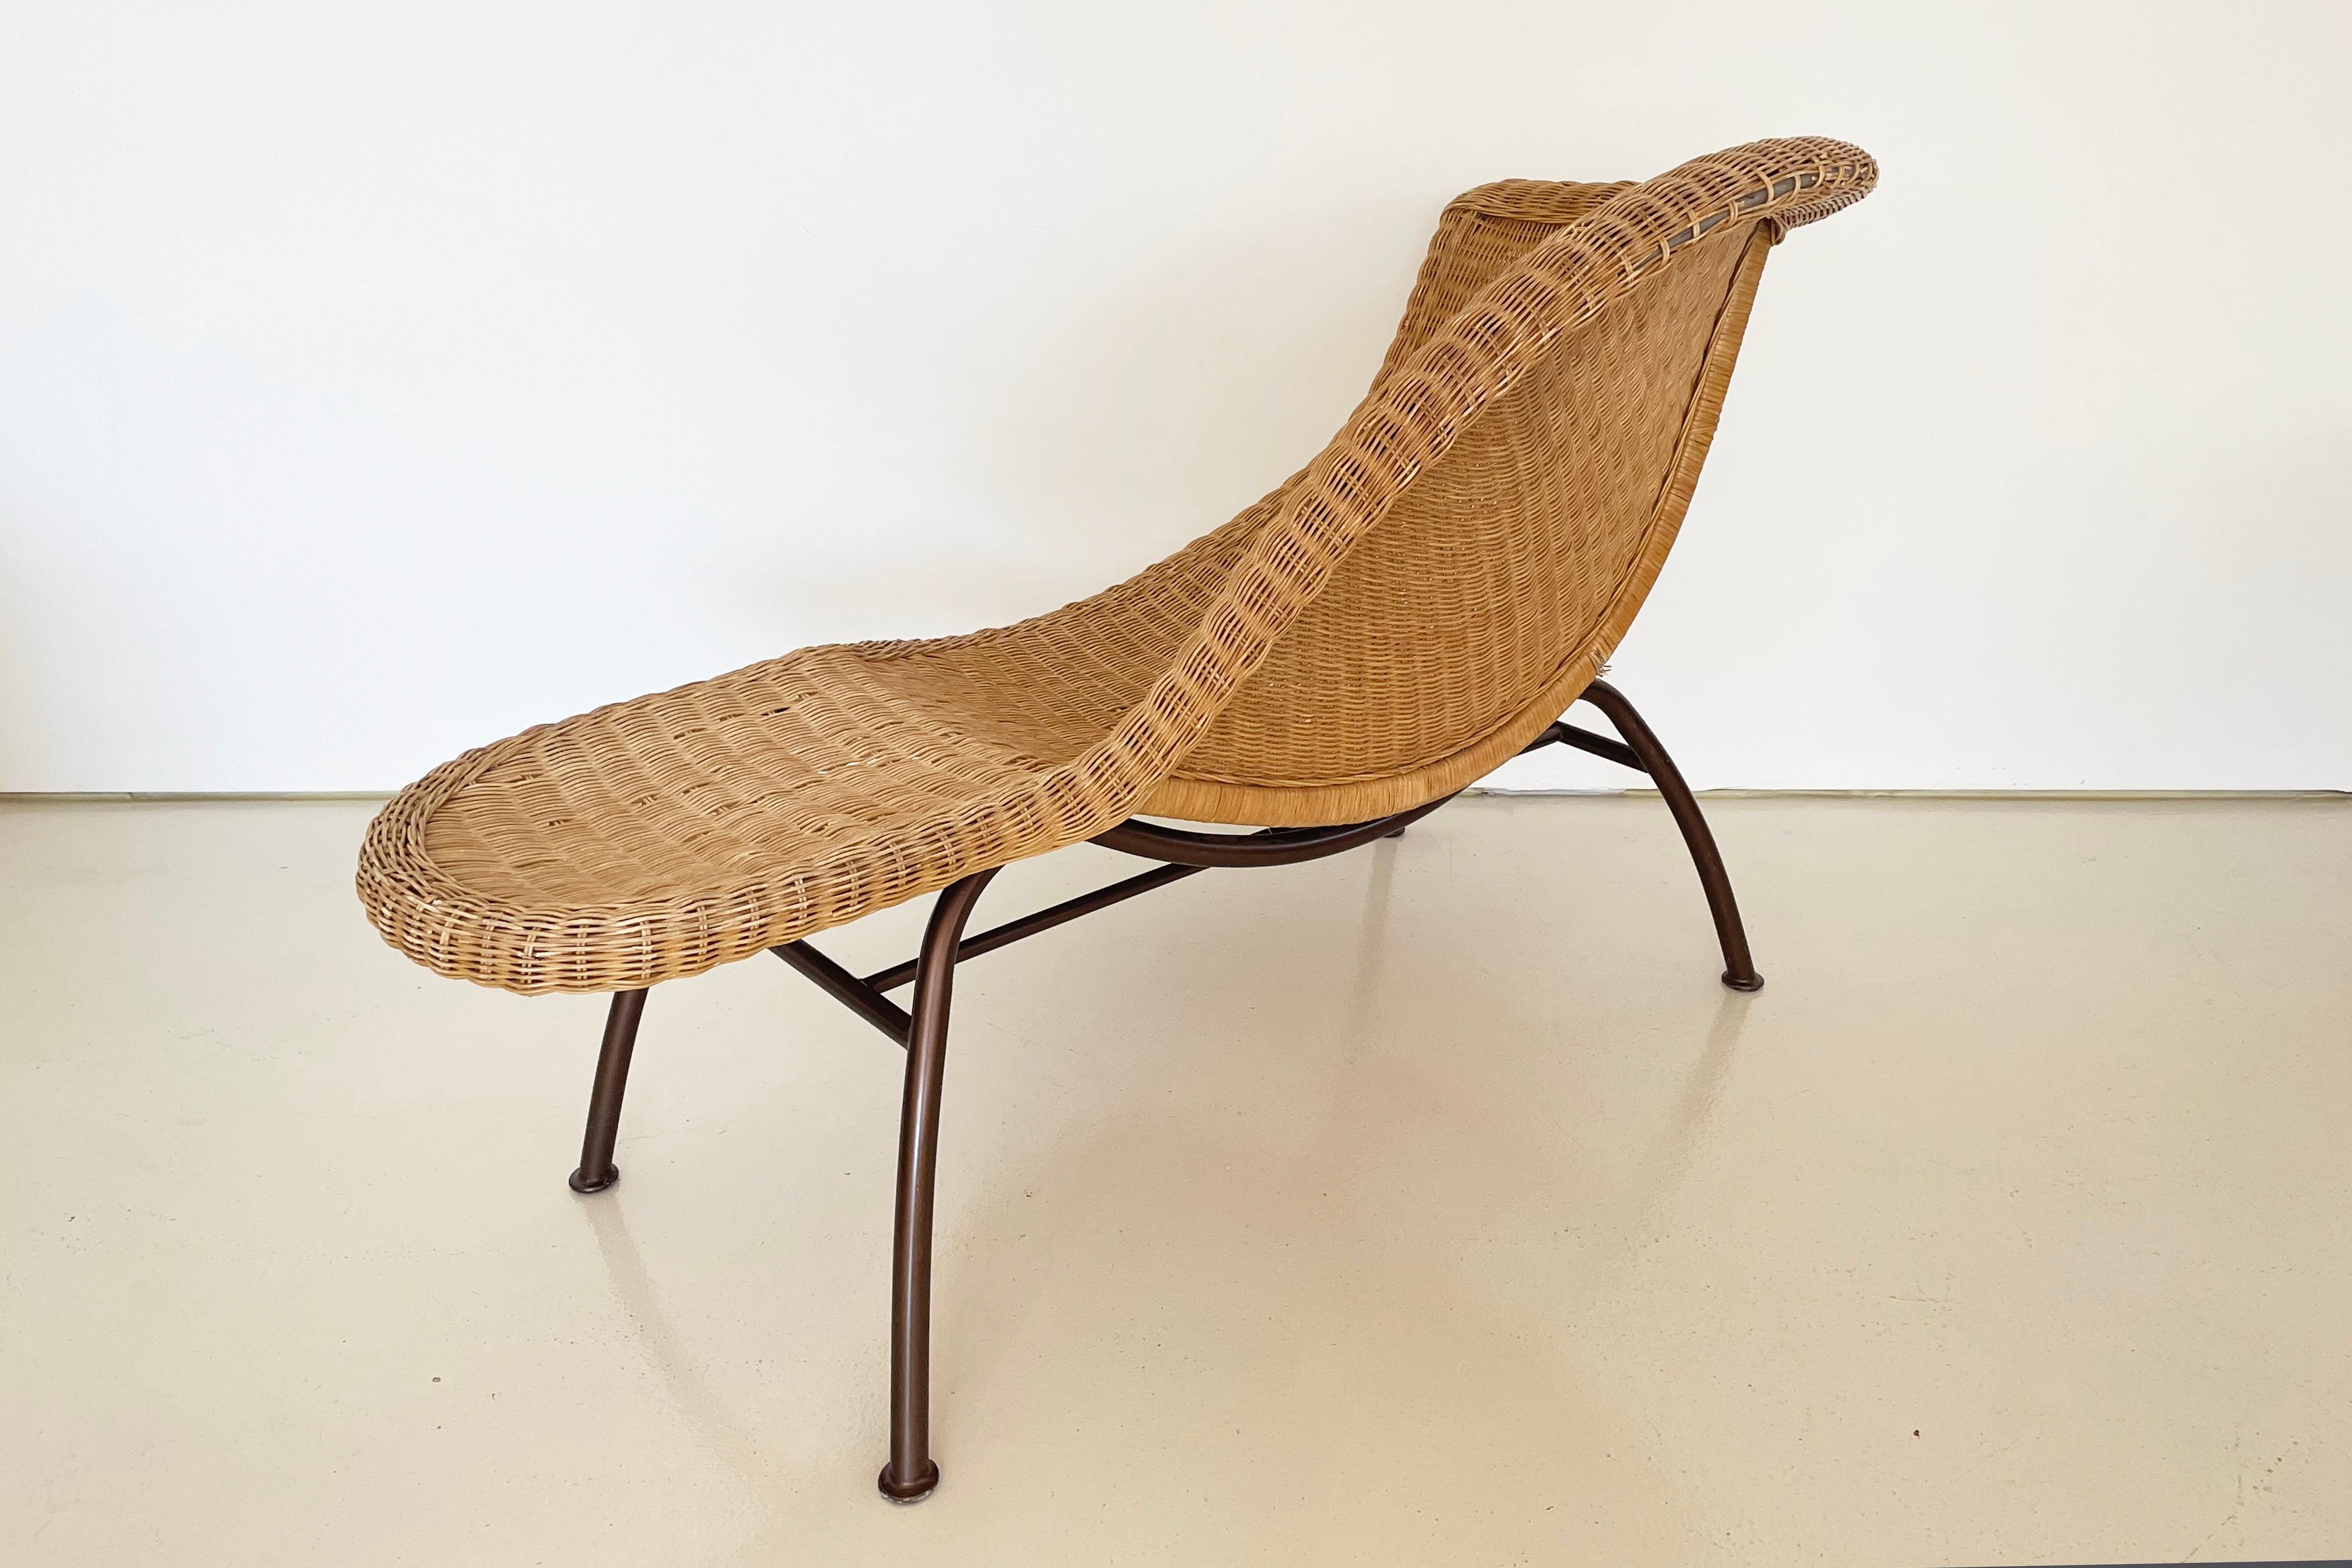 Organic Modern Vintage Wicker Chaise Lounge Chair For Sale